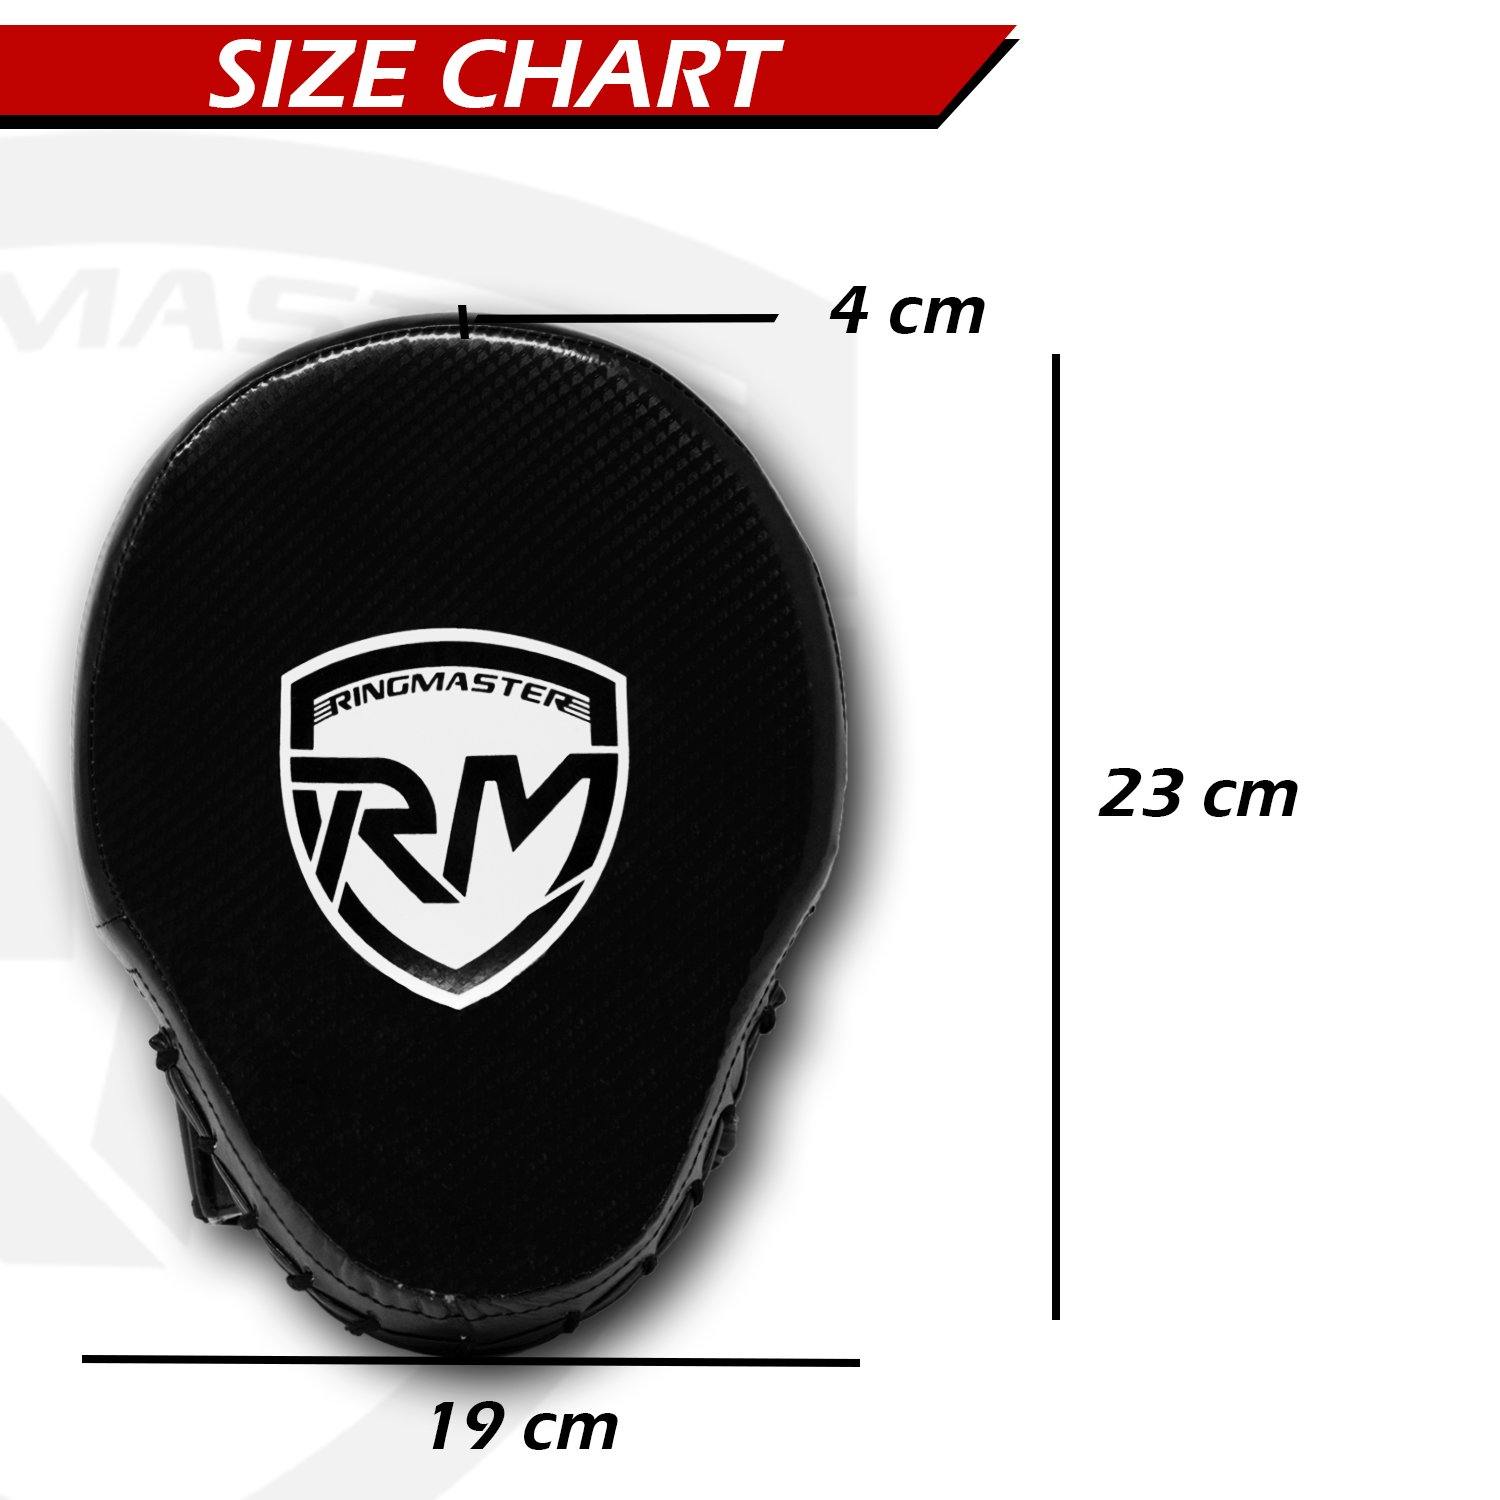 Main Event Boxing Pro Air Cushioned Mini Reaction Focus Pads, The